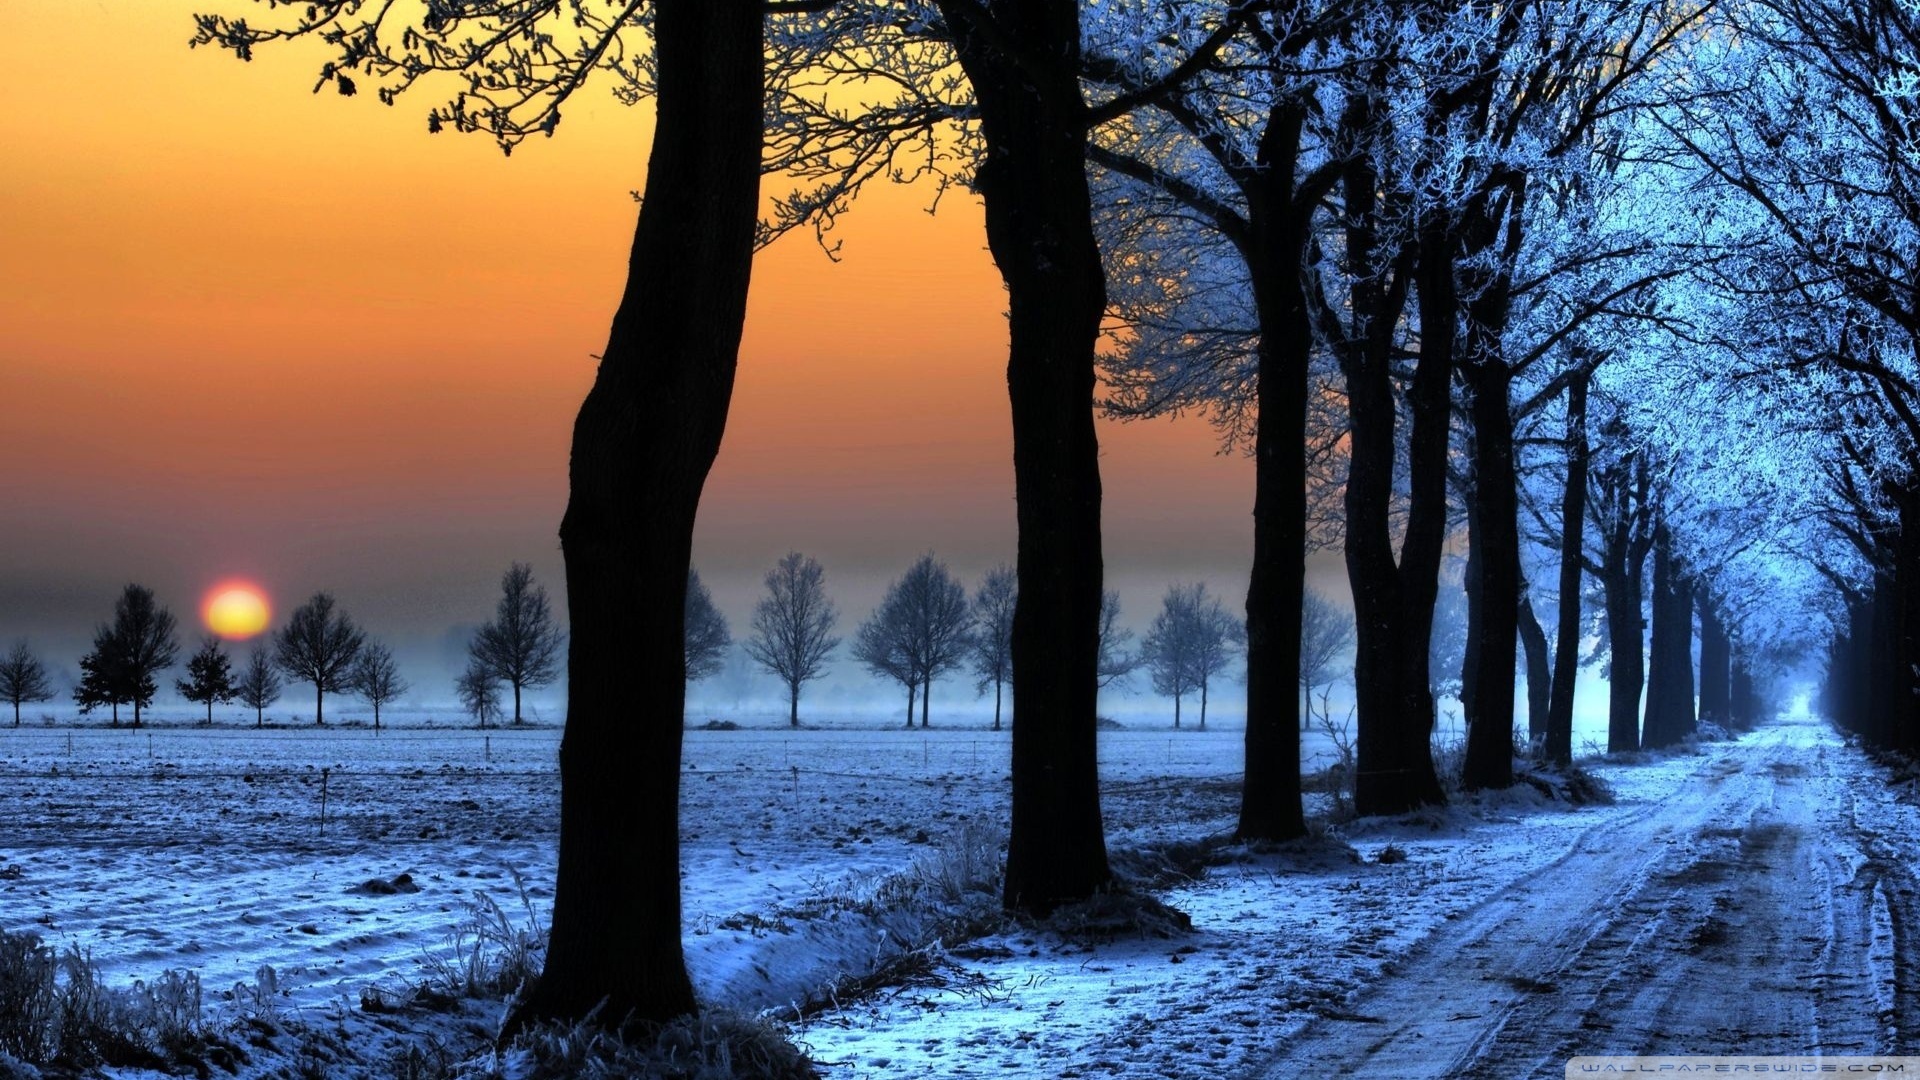 Download Winter Landscape With Orange Sky Wallpapers 1920x1080